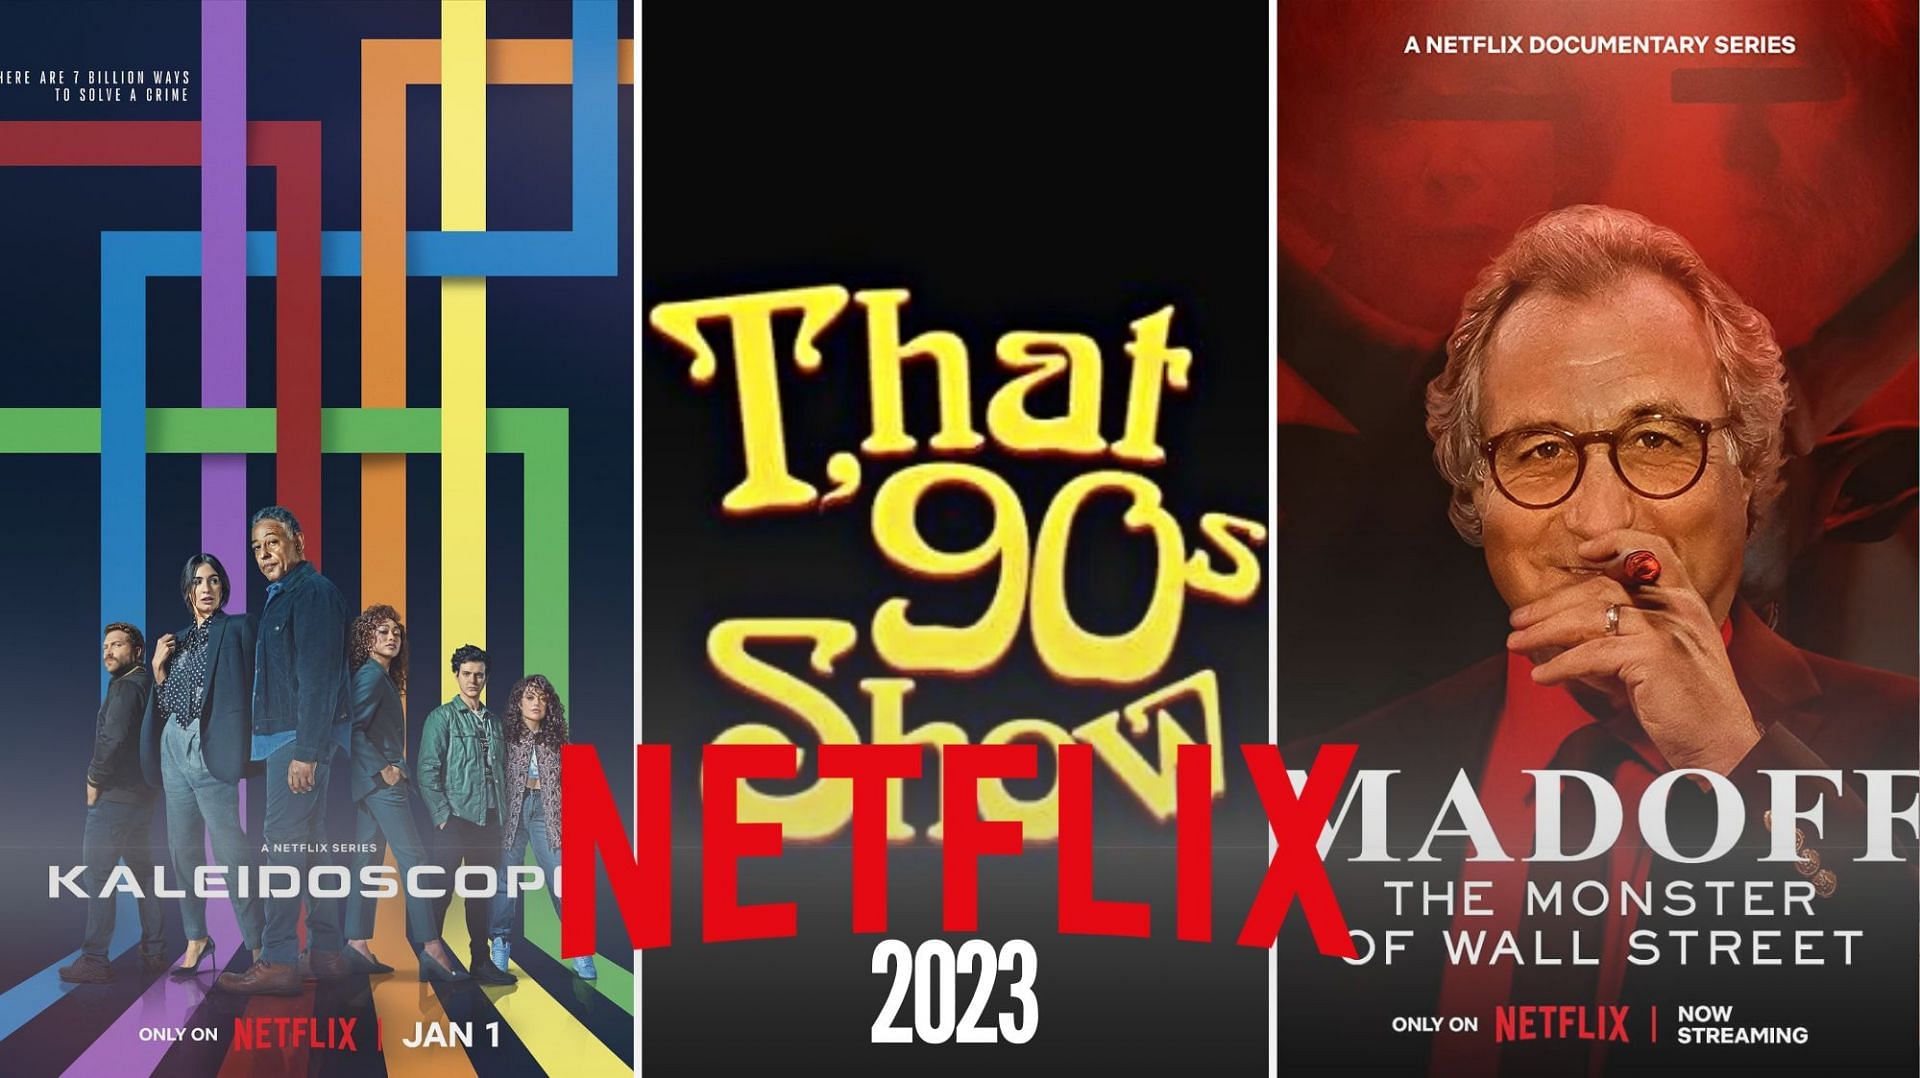 Every major Netflix film release coming in 2023